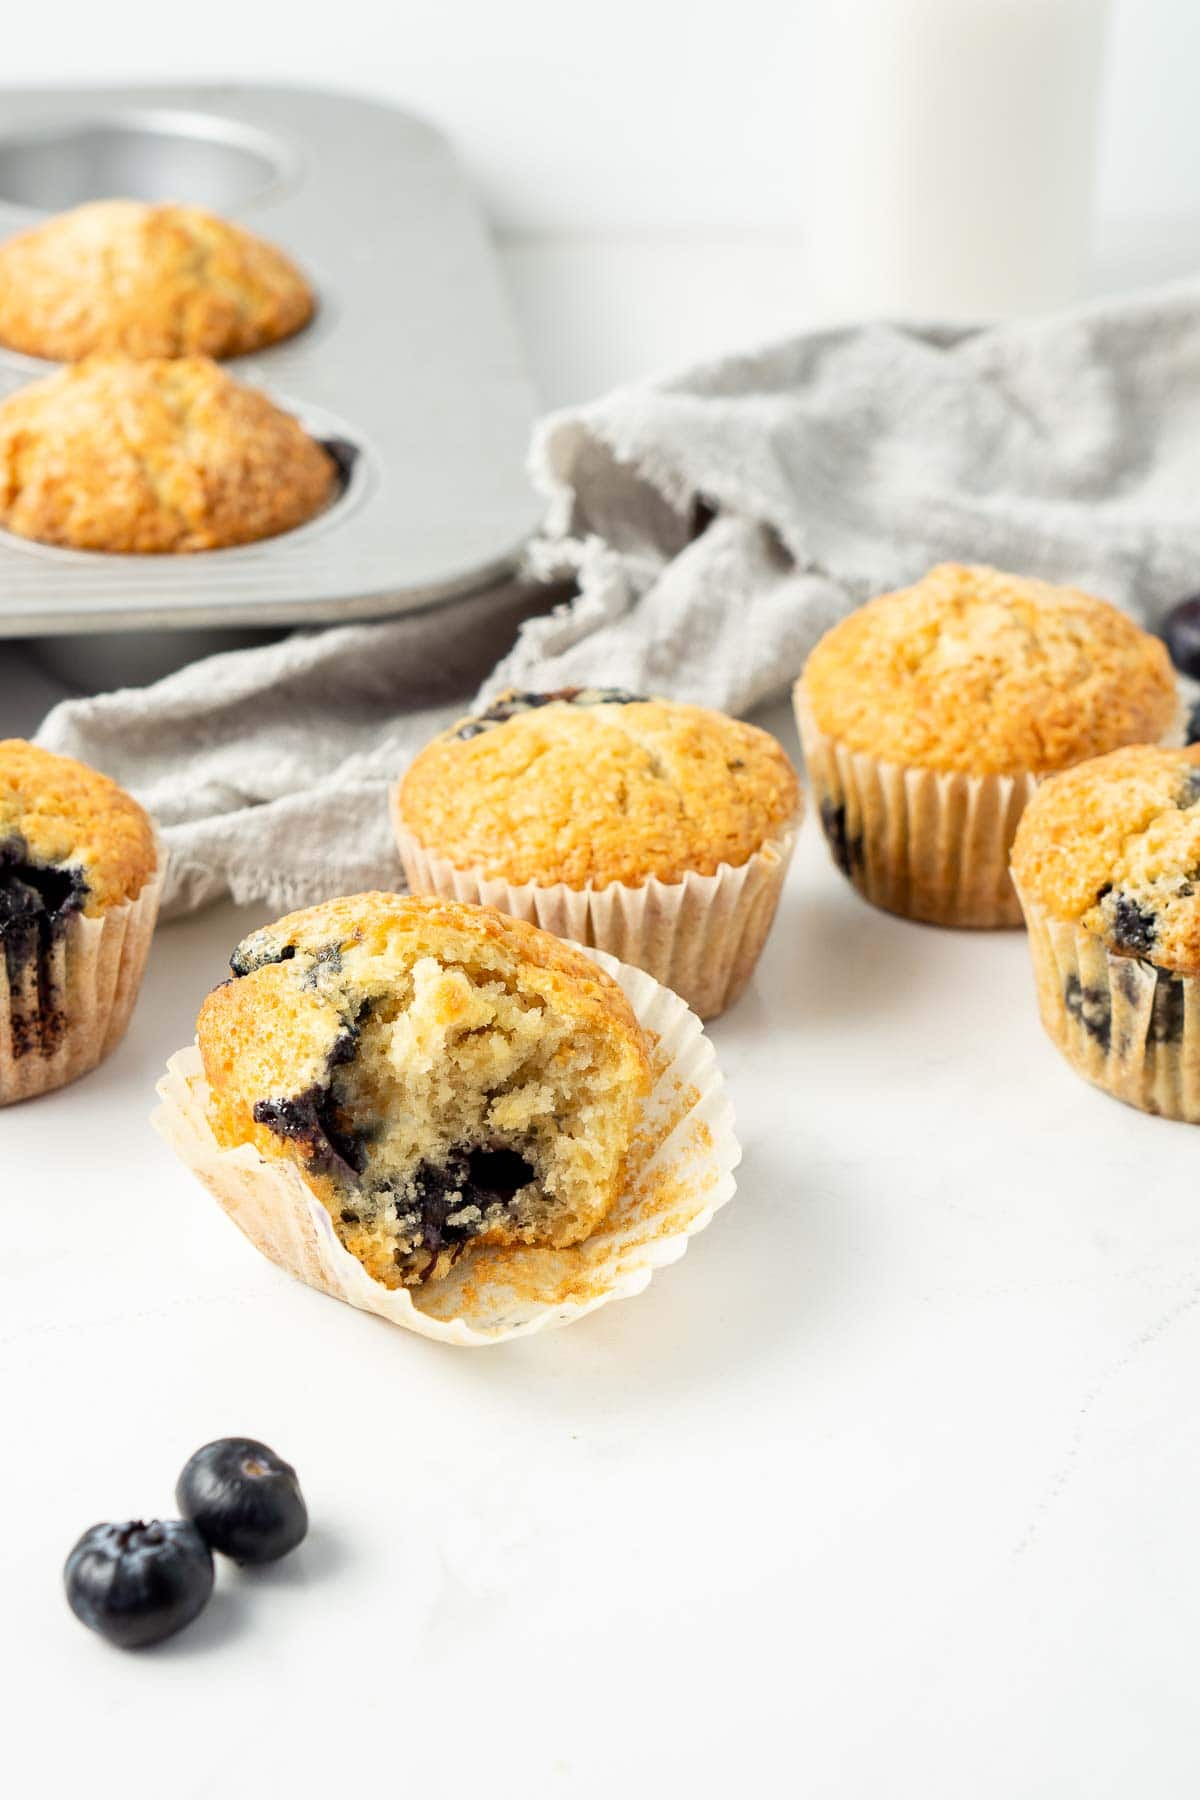 Blueberry muffins with a bite taken.